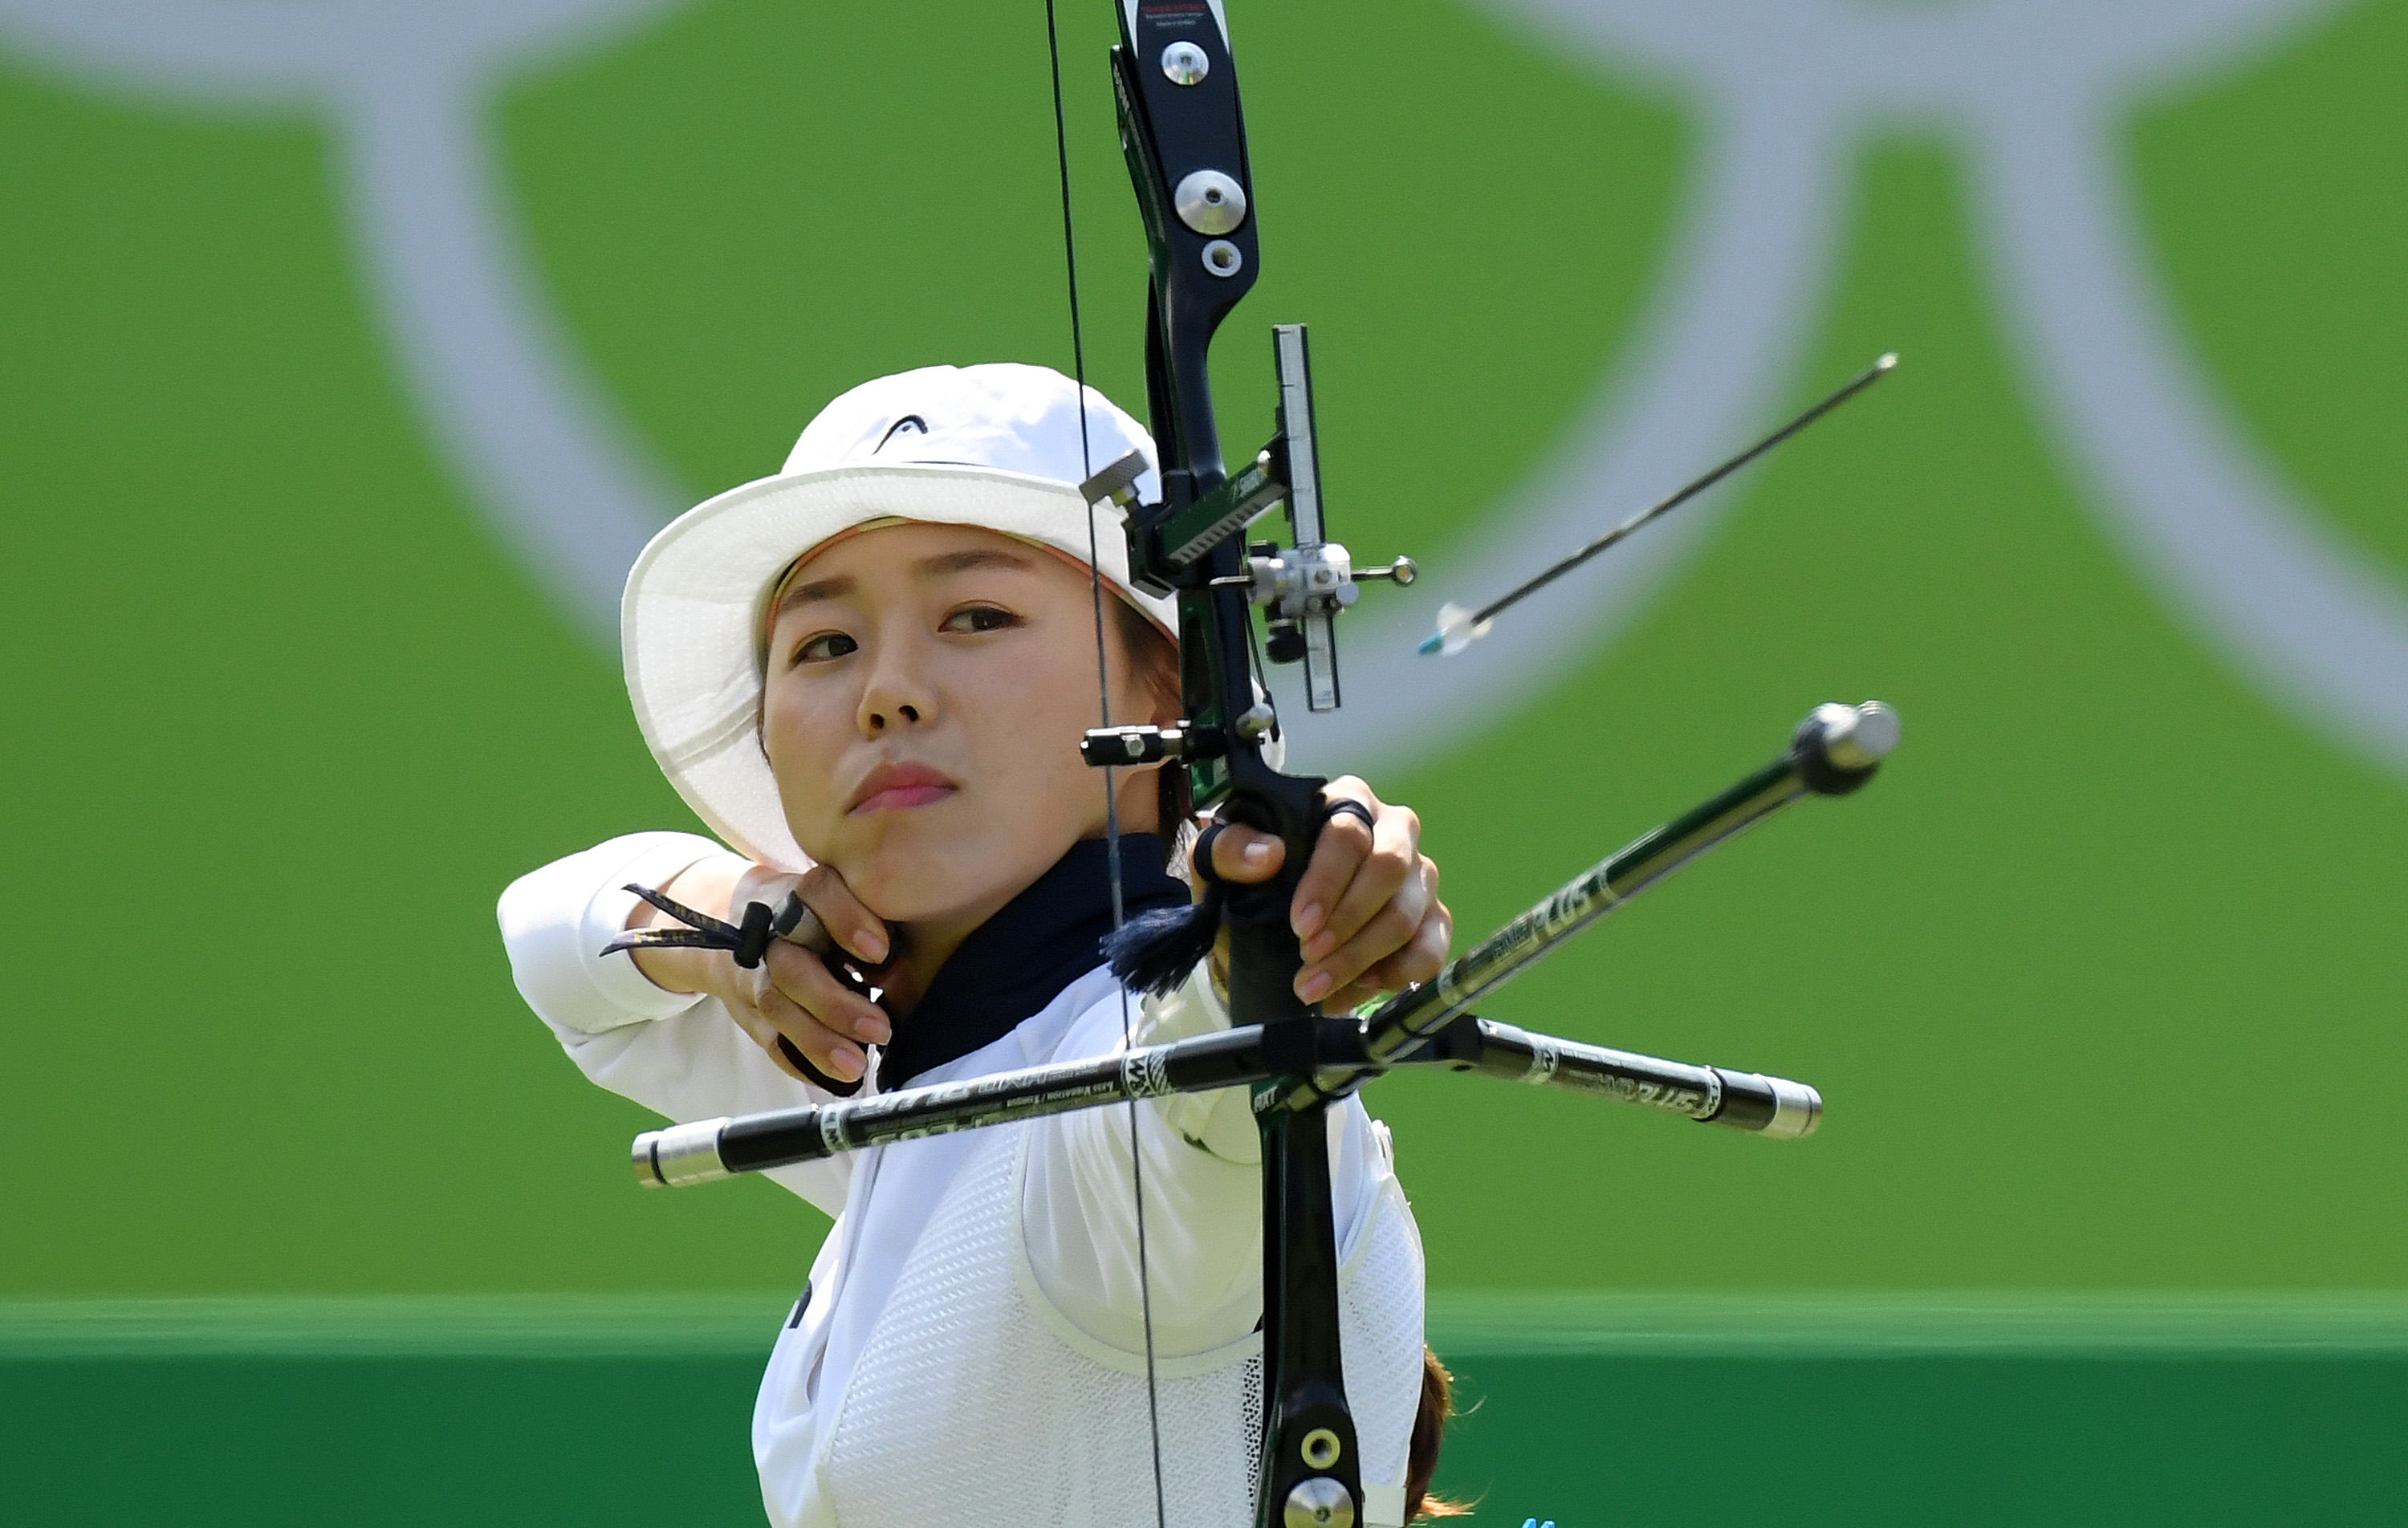 Olympics Archery Results, August 11: South Korea’s Chang Hye-jin wins the gold